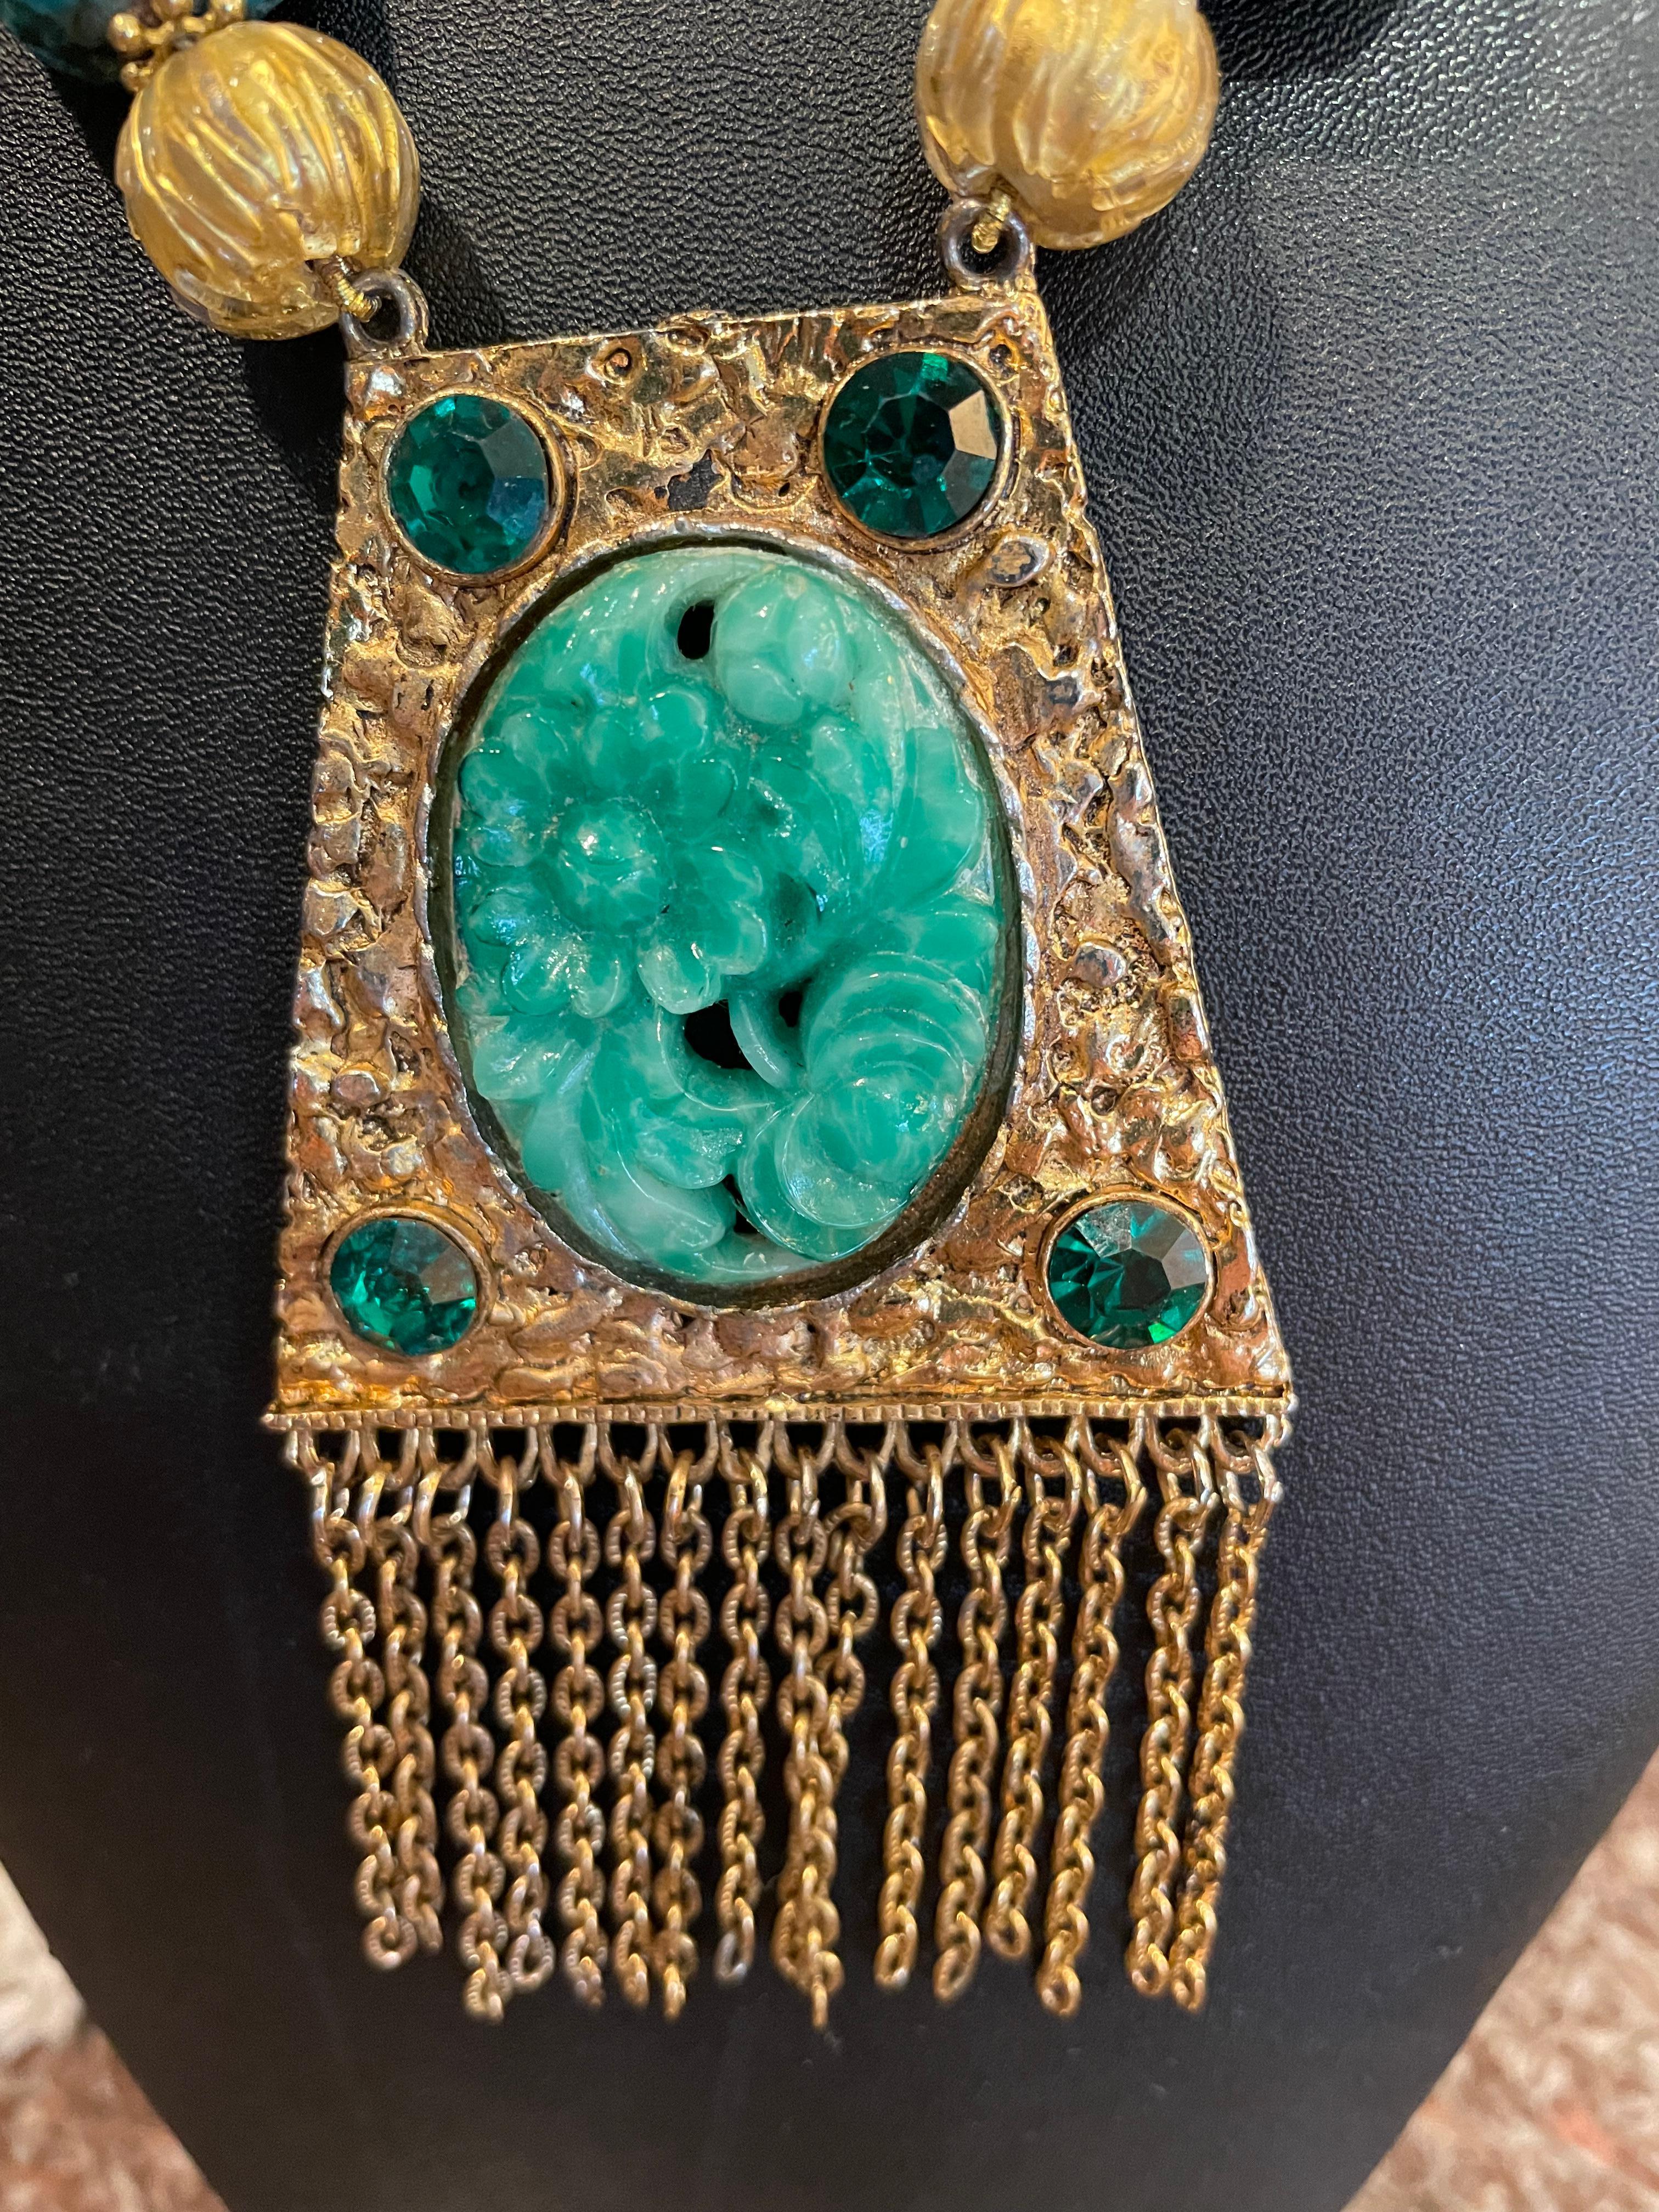 One of a kind,handmade,vintage faux ‘jade’ pendant from the 60’s on a strand of Venetian glass,vermeil, turquoise,and vintage faceted glass is on offer from Lorraine’s Bijoux.This modernized Renaissance style is smashing !